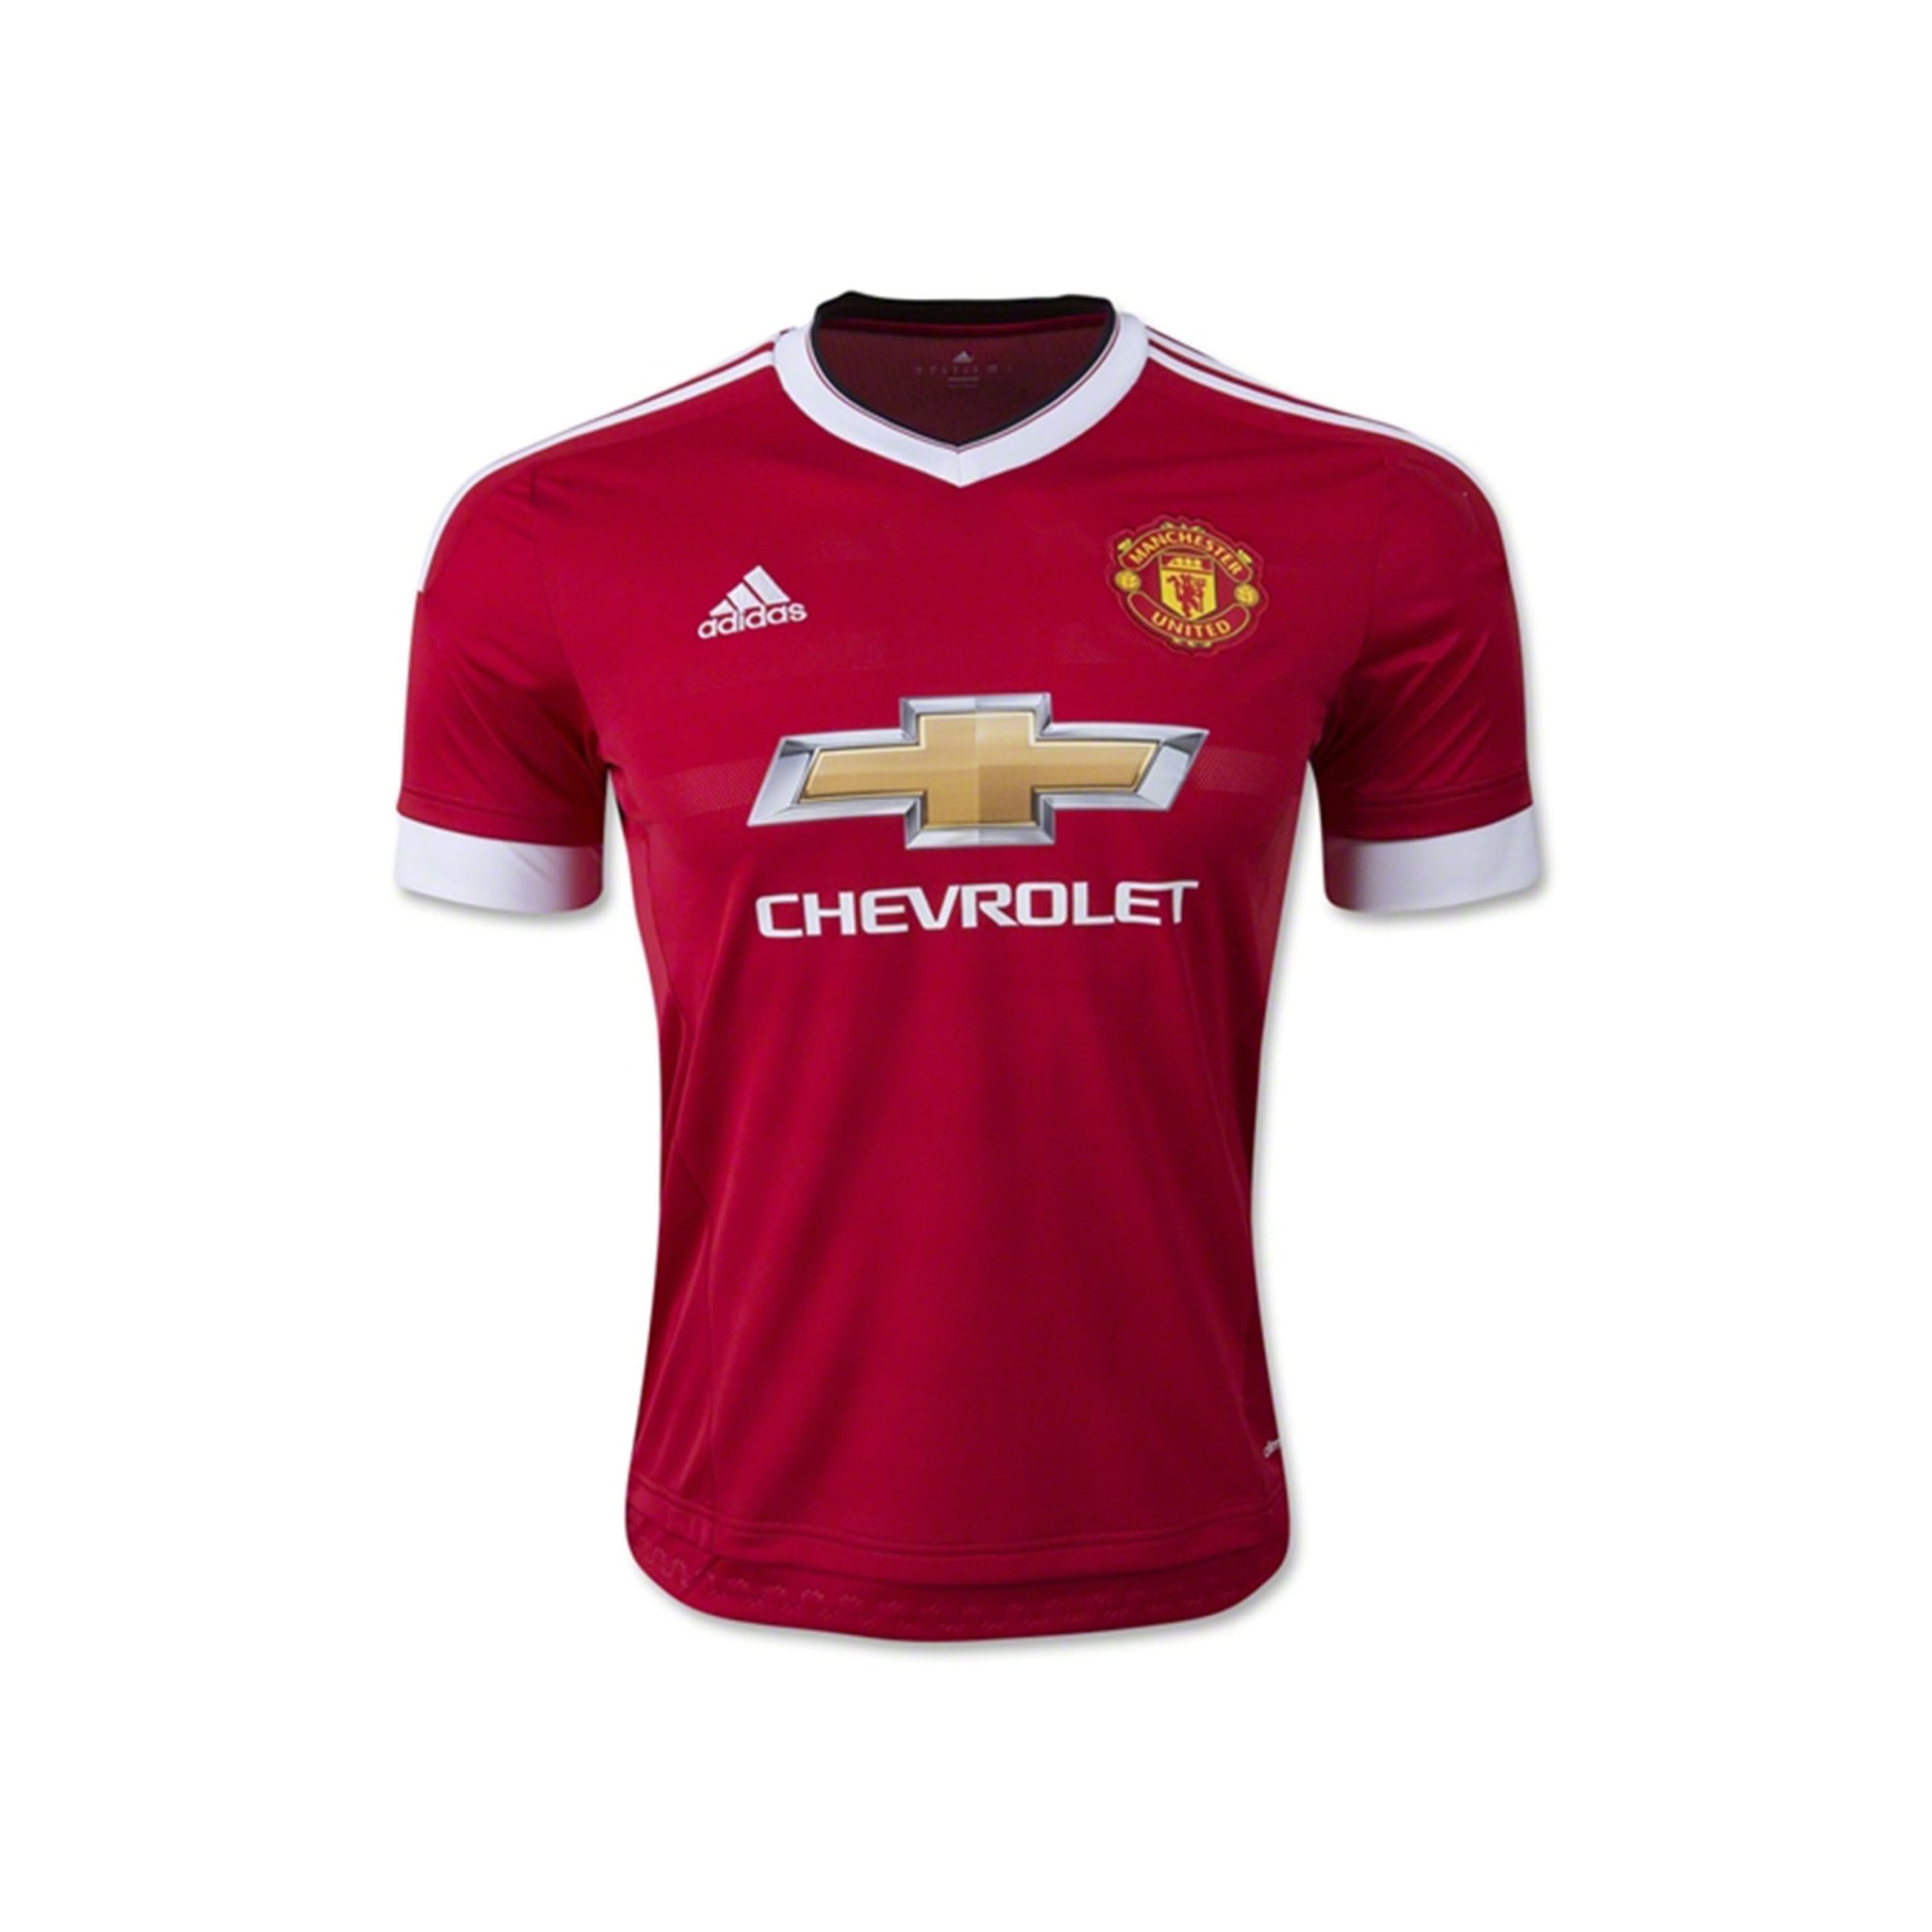 ADIDAS Manchester United FC Home 15/16